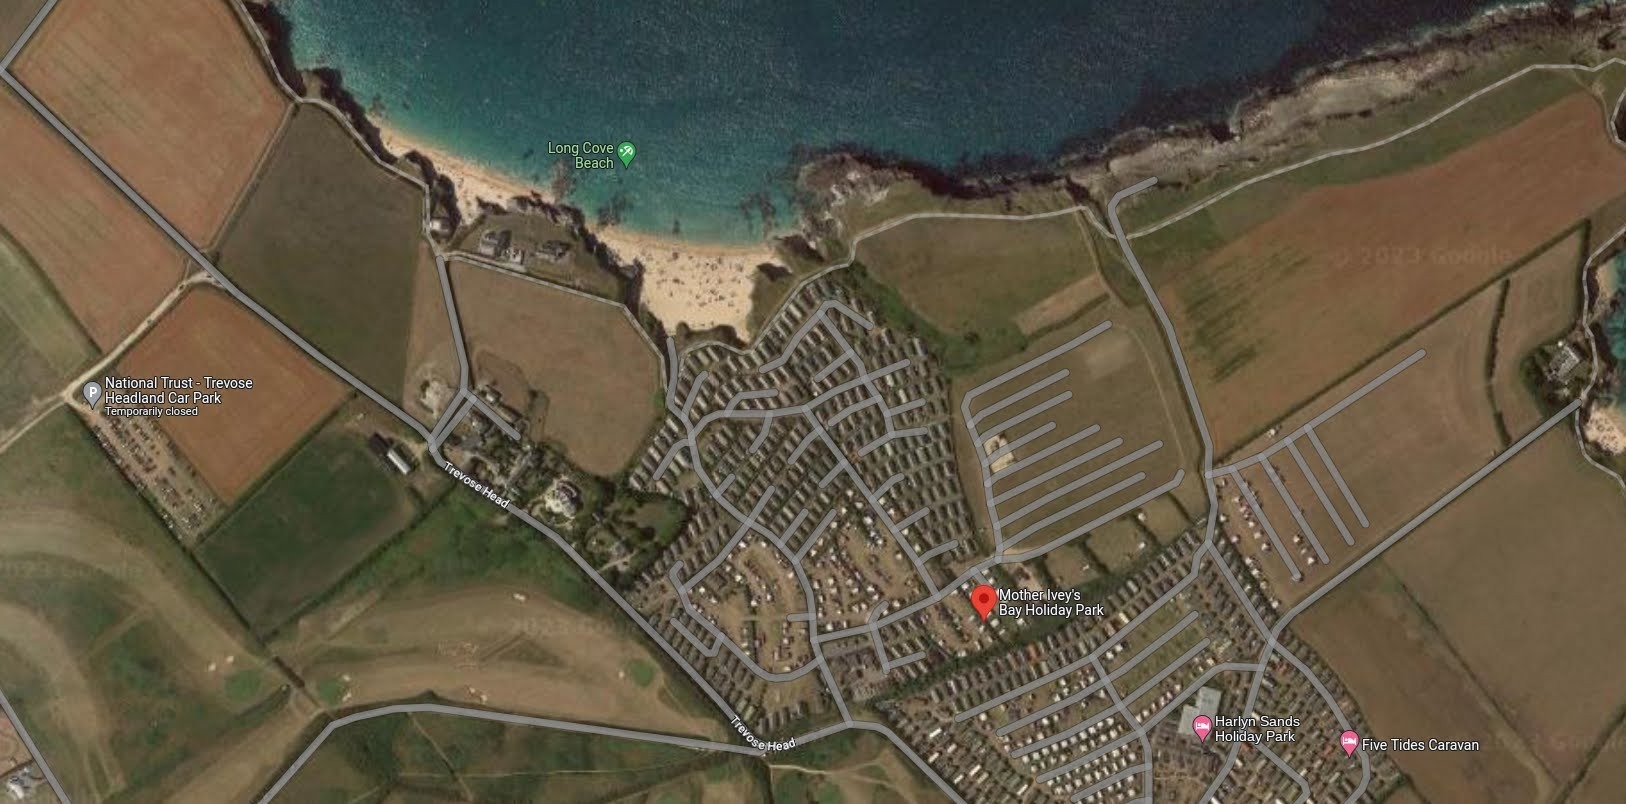 Aerial view of Mother Ivey\s Bay Holiday Park which has applied for planning permission for 51 holiday lodges (Image: Google)